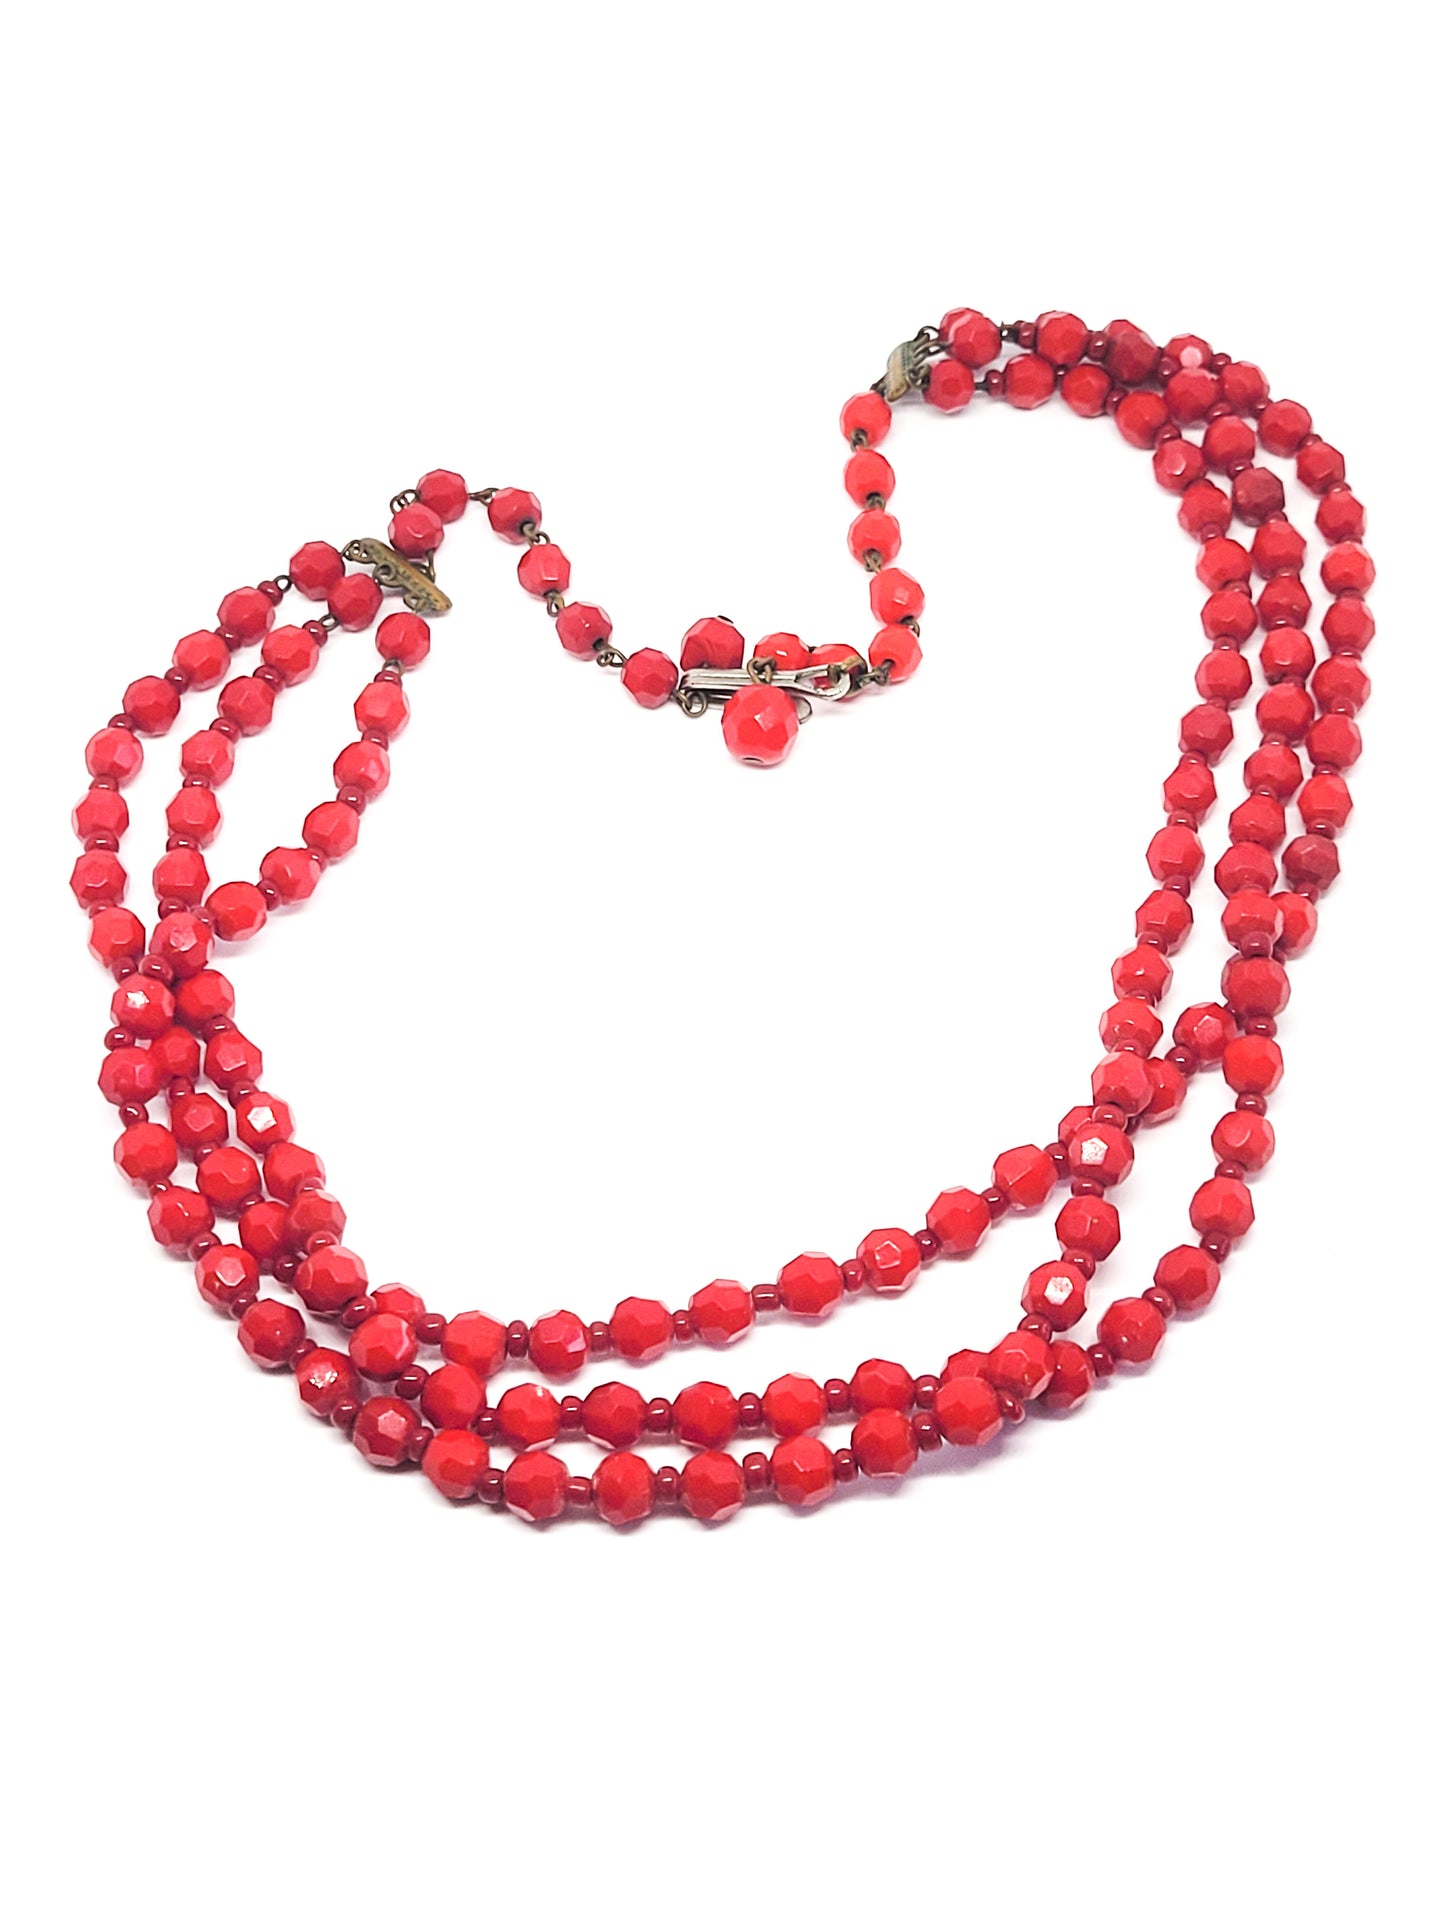 Tripple 3 strand red faceted Czech glass vintage beaded necklace 18.5 inches